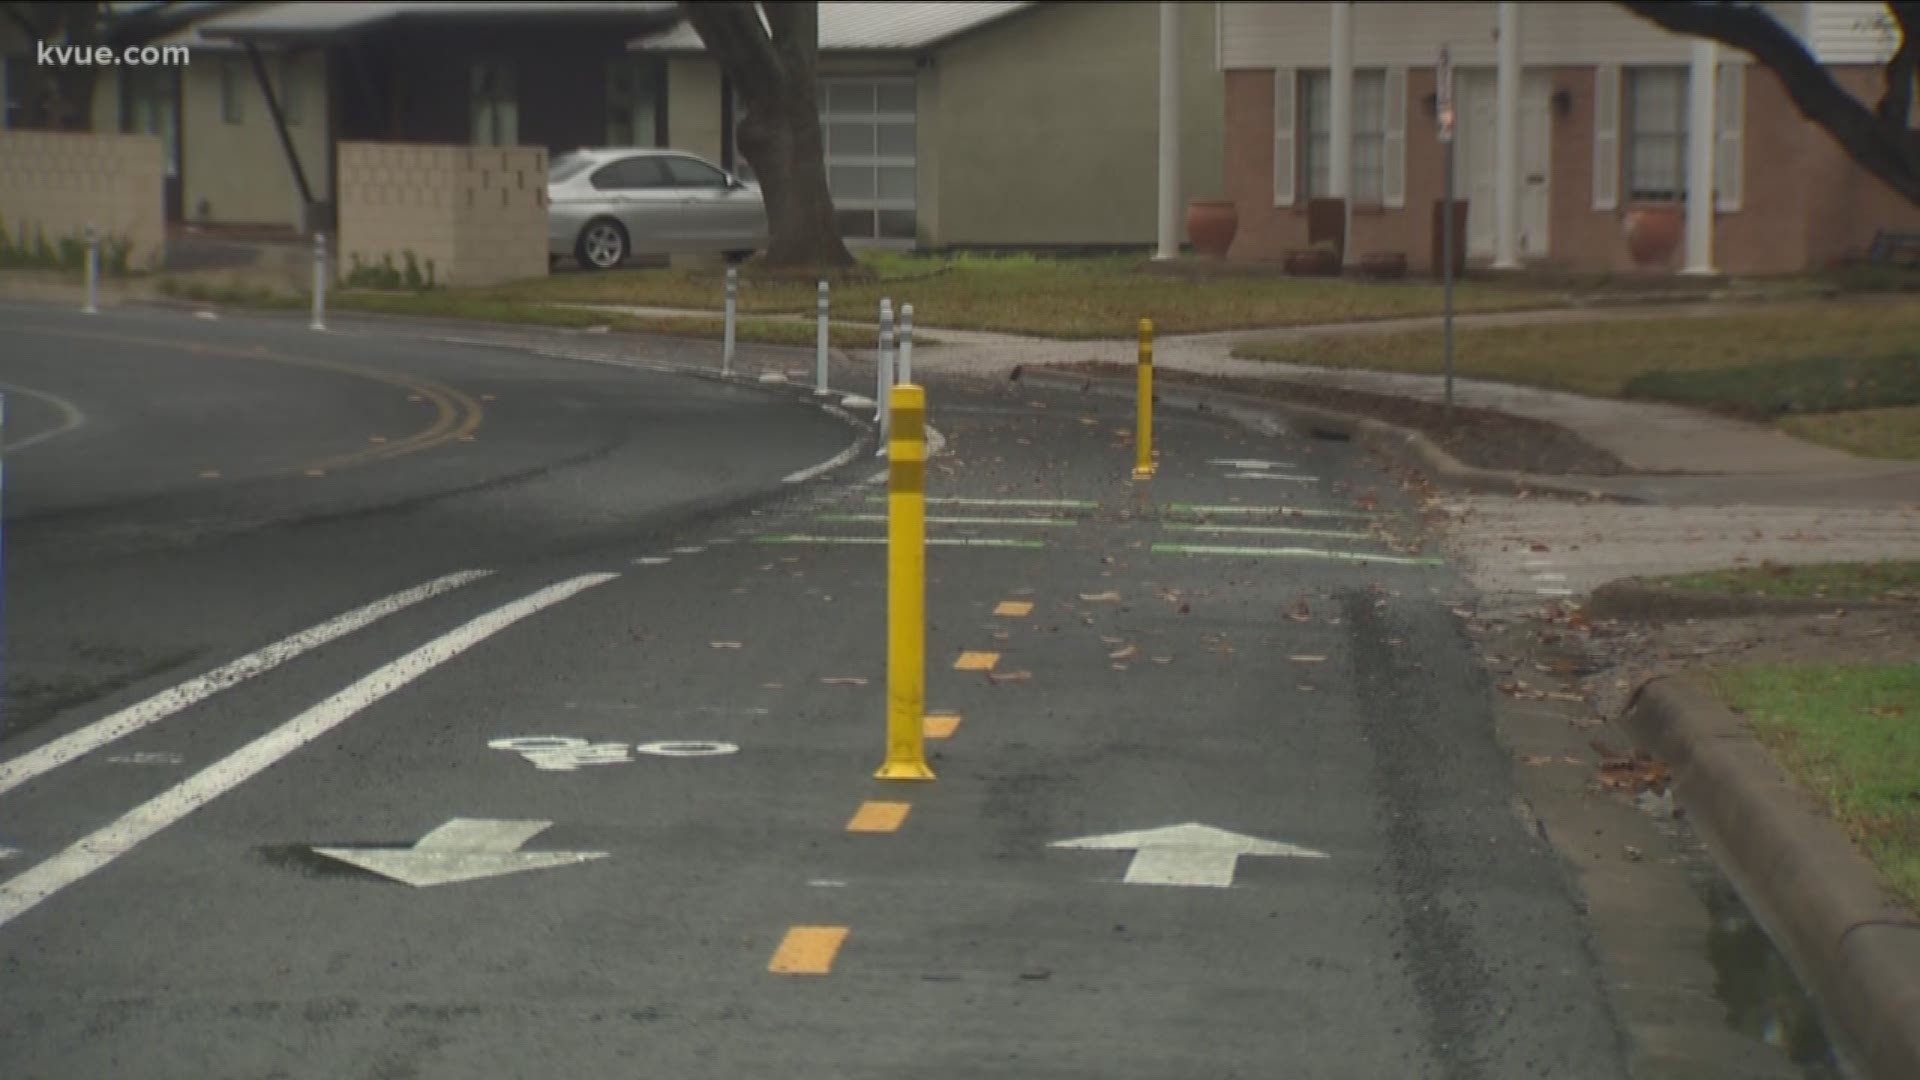 The City said the new bike lanes are slowing down drivers and calming traffic – but some homeowners on Shoal Creek Boulevard are anything but calm about the lanes.